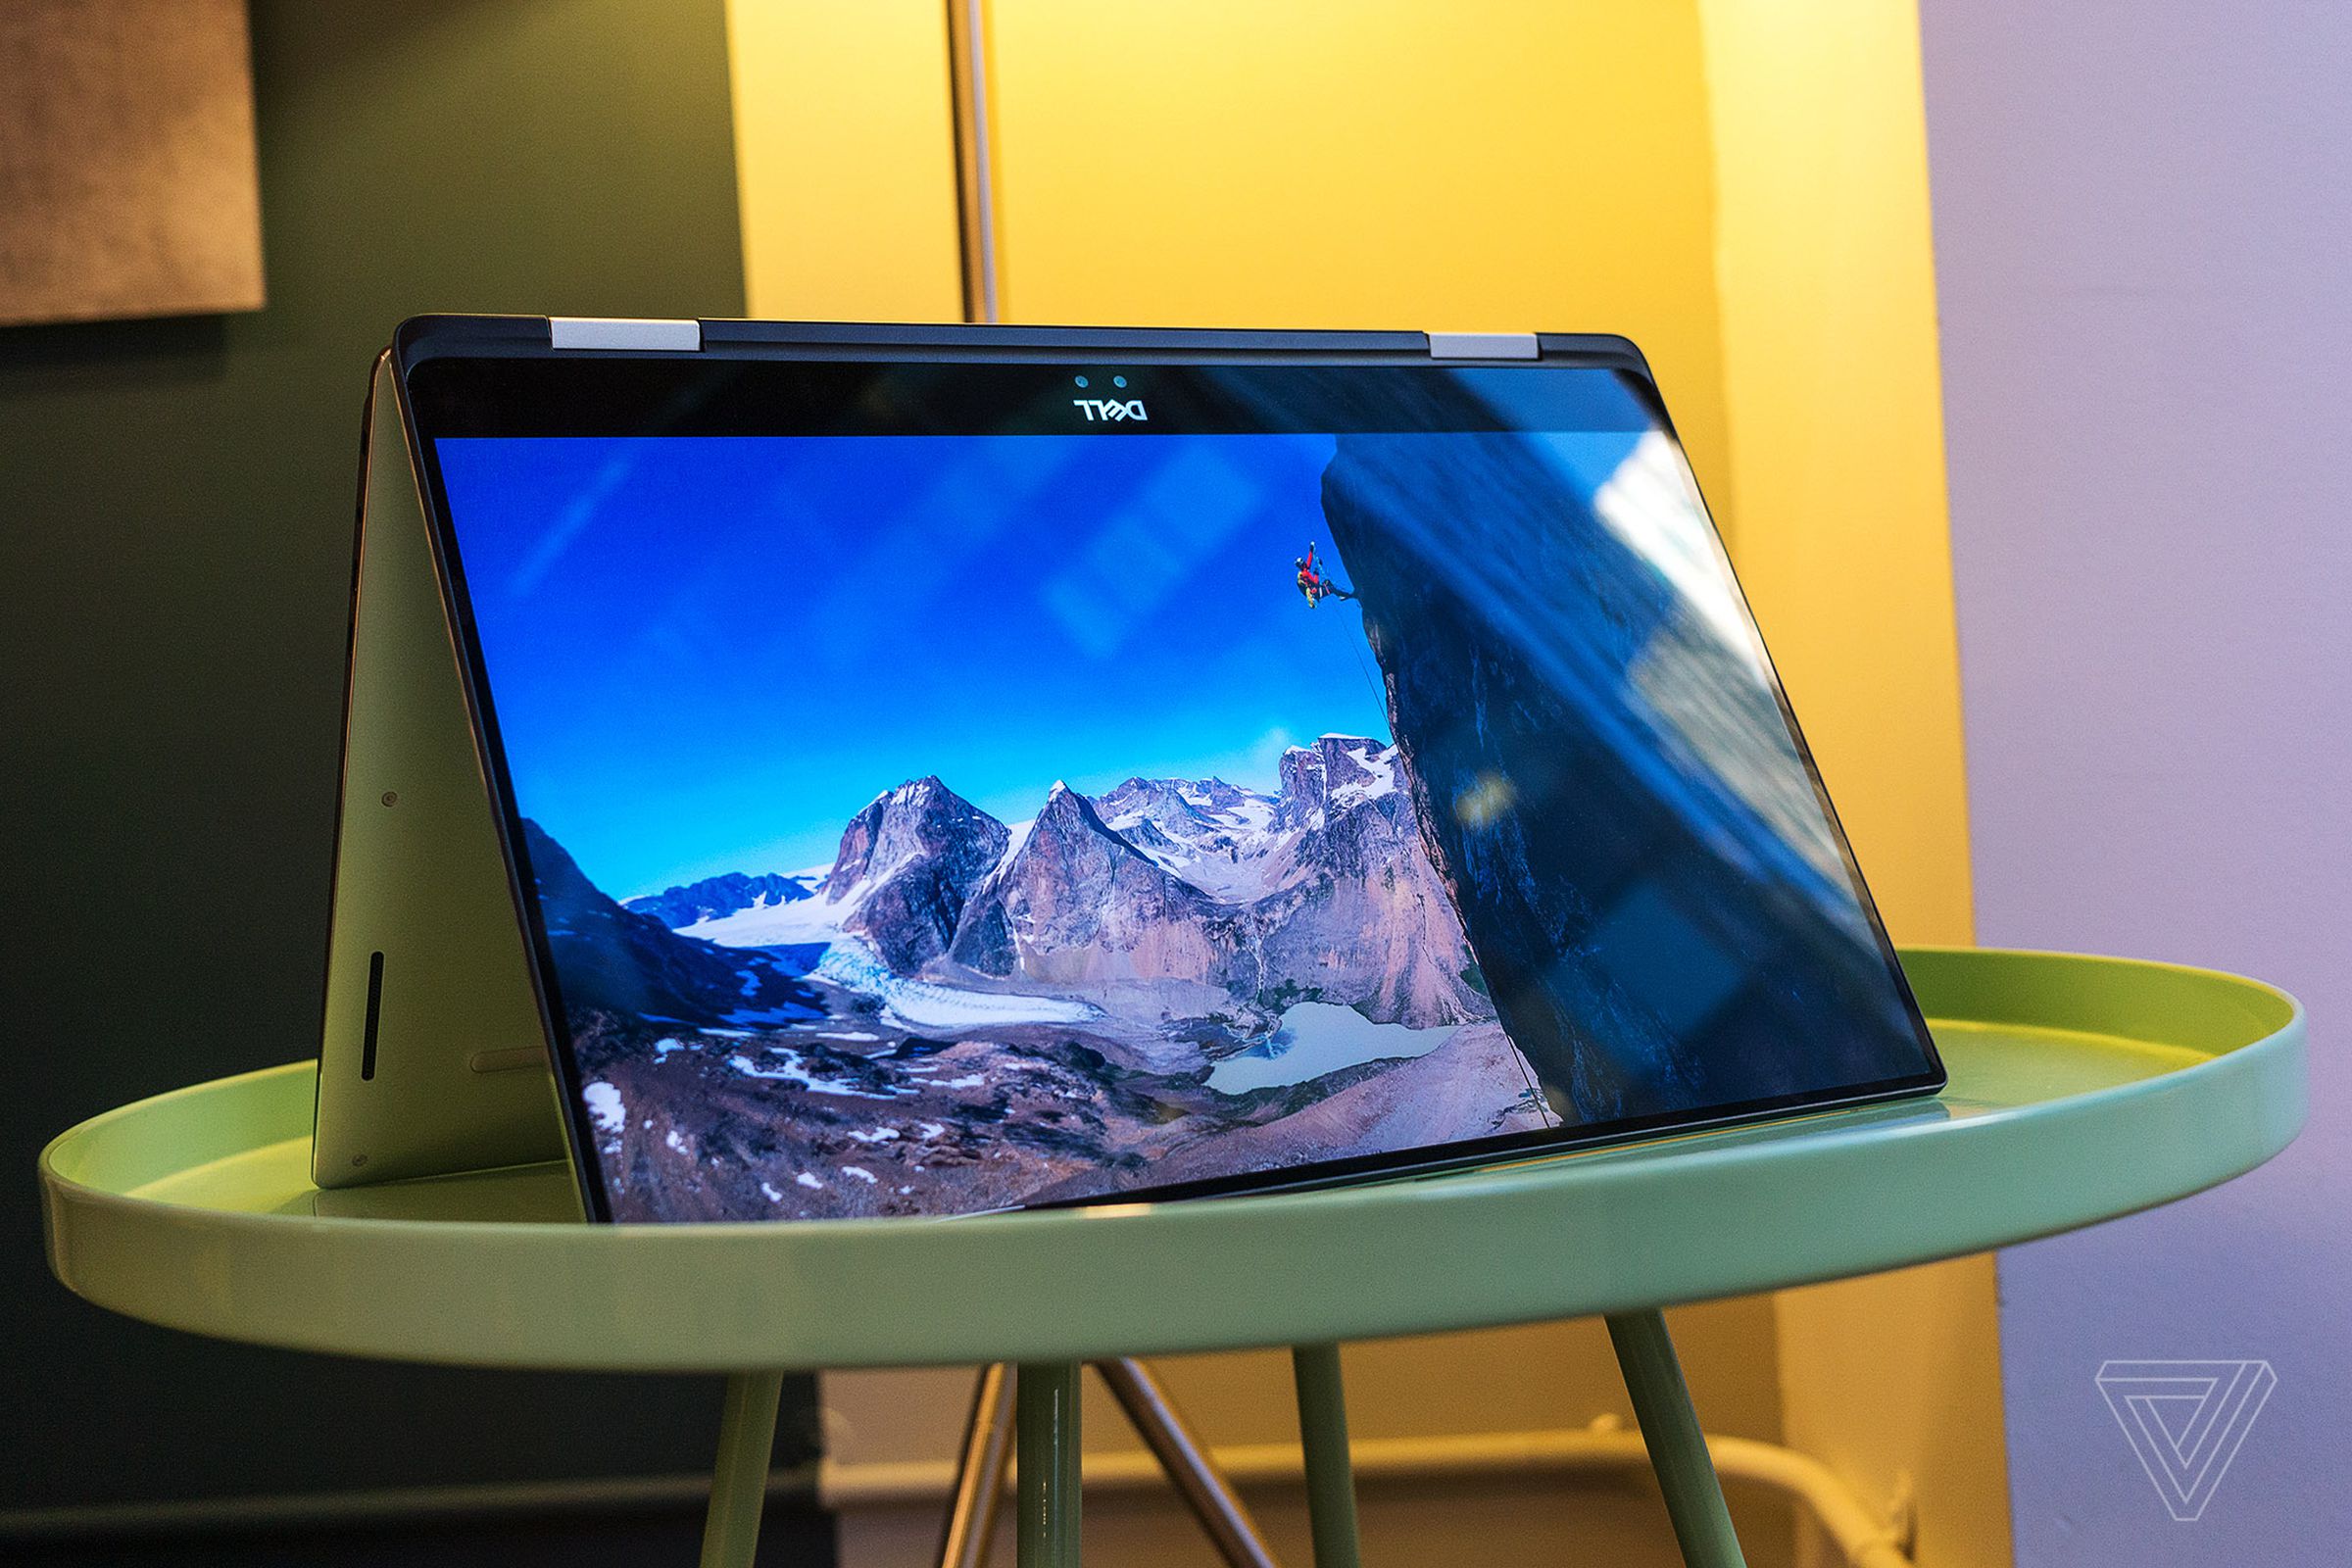 Dell’s XPS 15 2-in-1